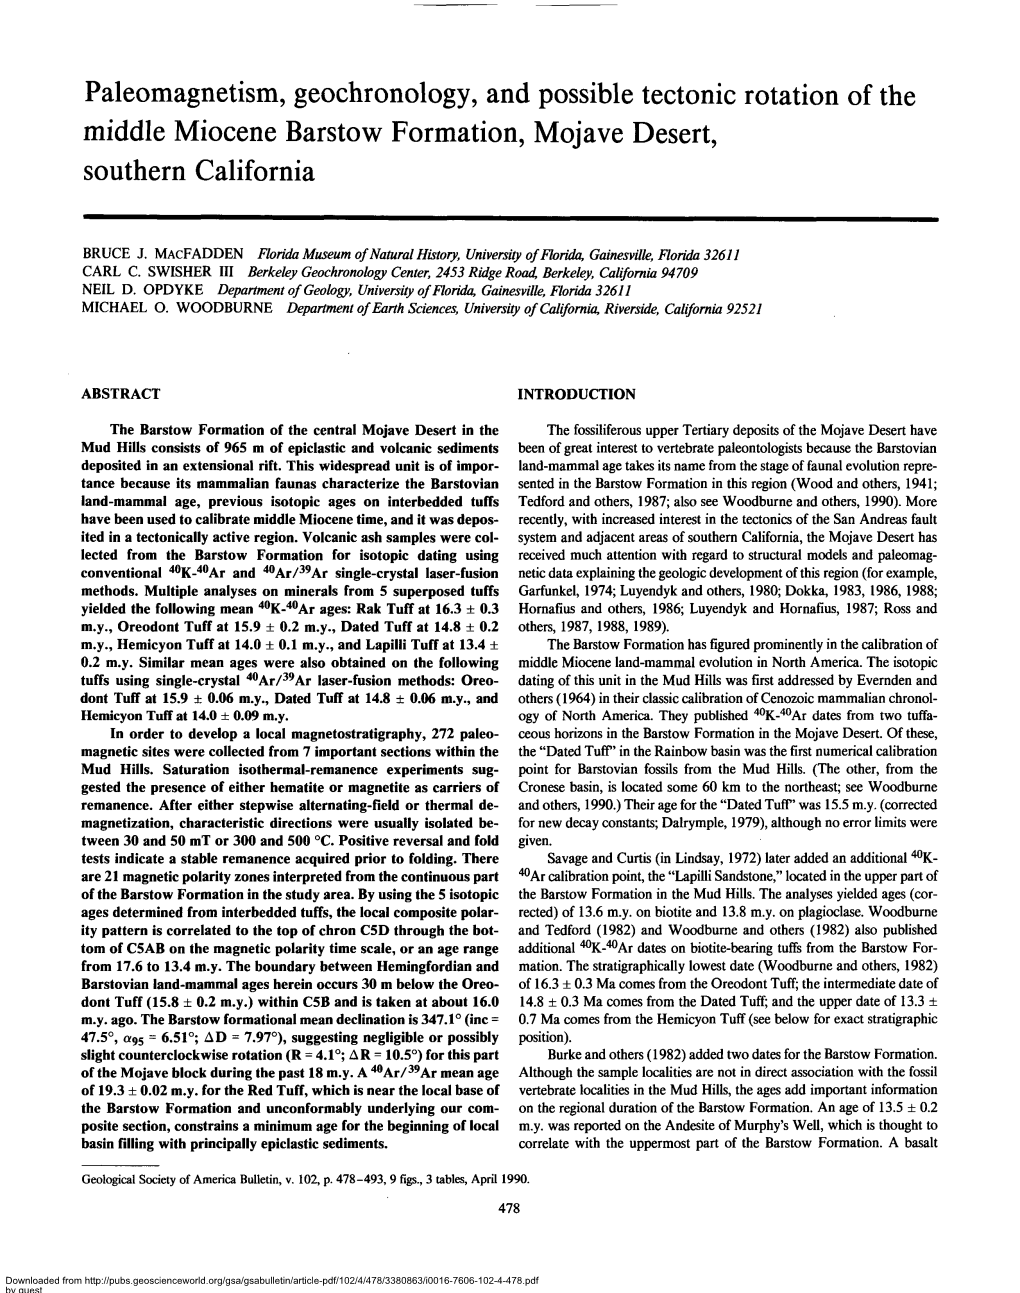 Paleomagnetism, Geochronology, and Possible Tectonic Rotation of the Middle Miocene Barstow Formation, Mojave Desert, Southern California